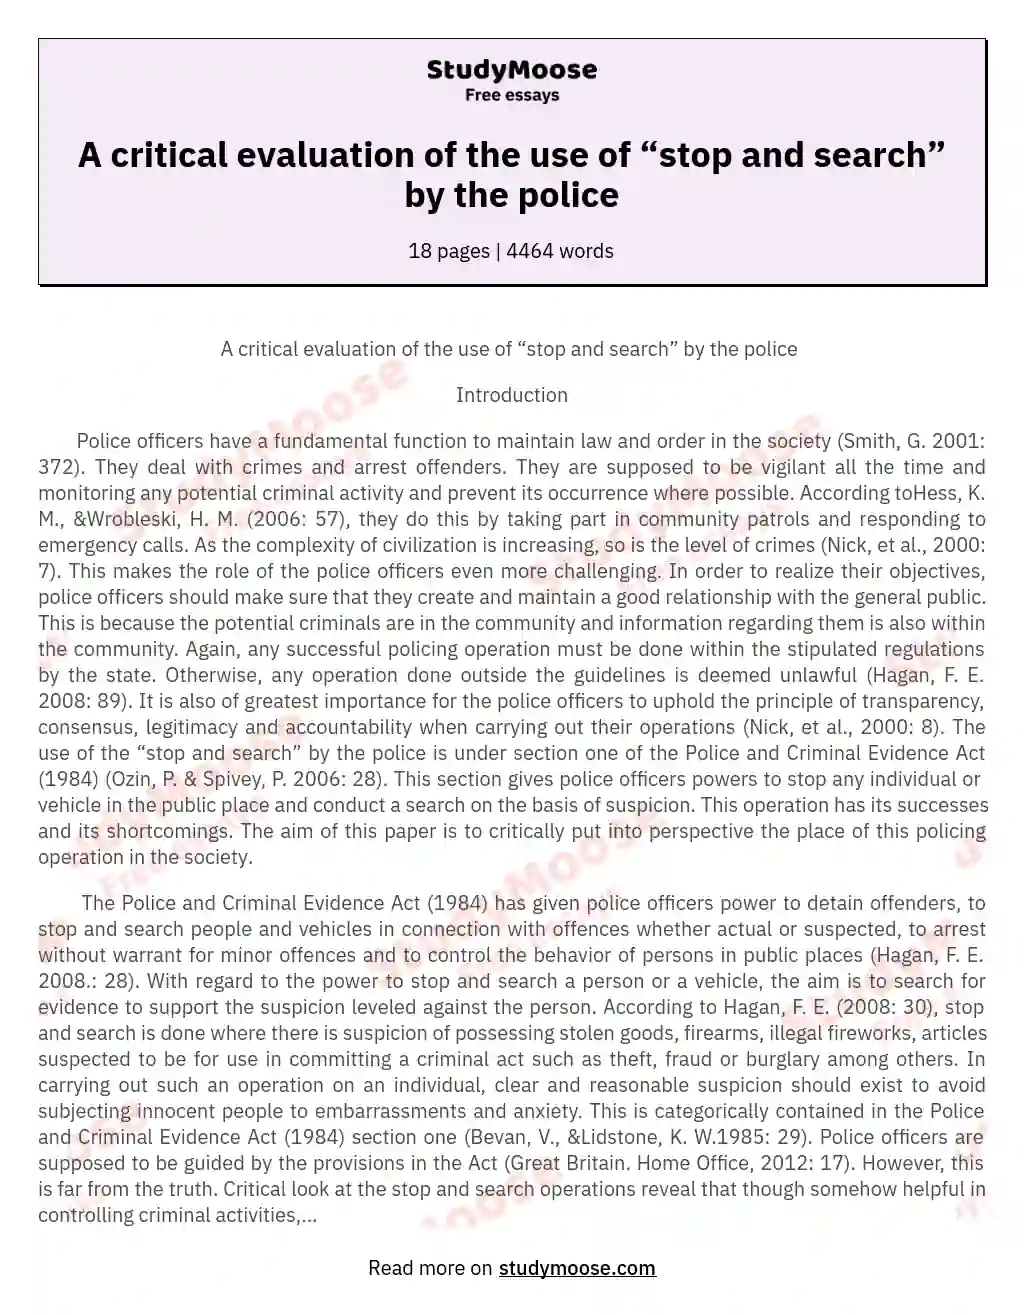 A critical evaluation of the use of “stop and search” by the police essay